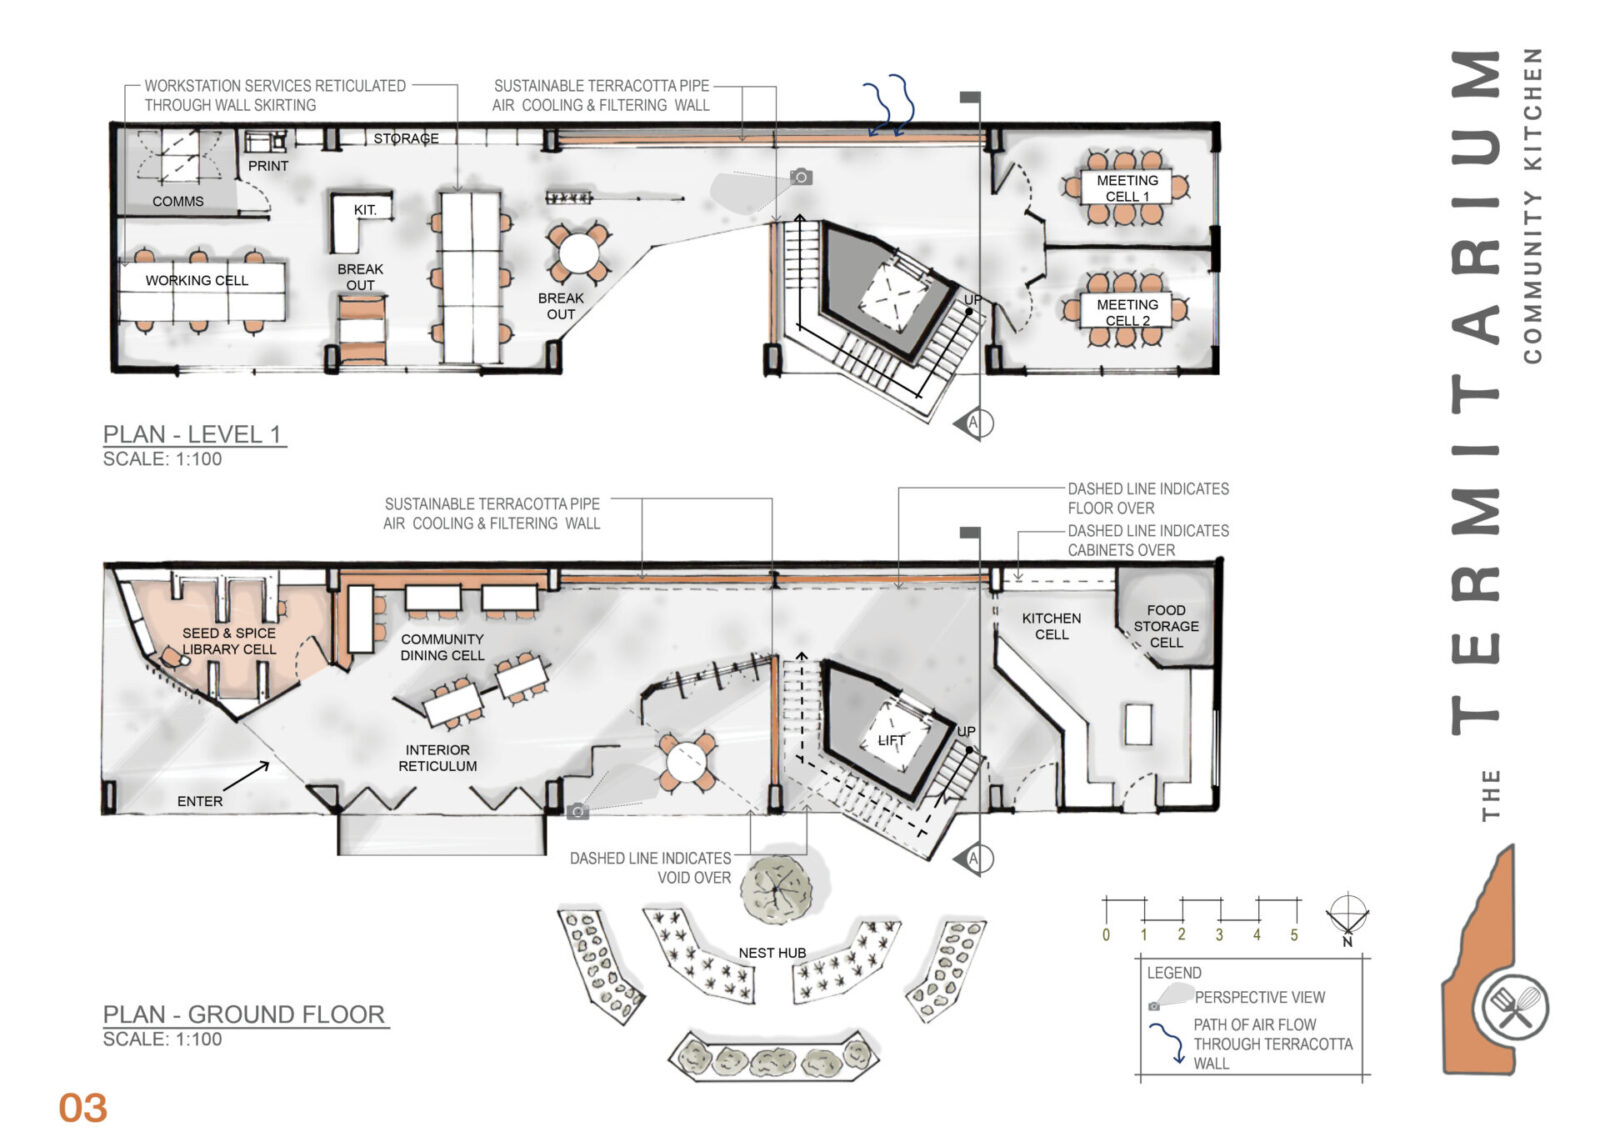 The ground plan and level 1 plan of the main building. 
The ground plan included a seed a spice library to the left of the main entry, Beside that a community dining cell. The interior reticulum leads to the main "nest"/ hub which is where the stairs and left to the first floor are found.  At the rear of the ground floor is the large community kitchen.  The first floor supports two meeting rooms, 8 workstations, a small kitchen and break out spaces and storage.
